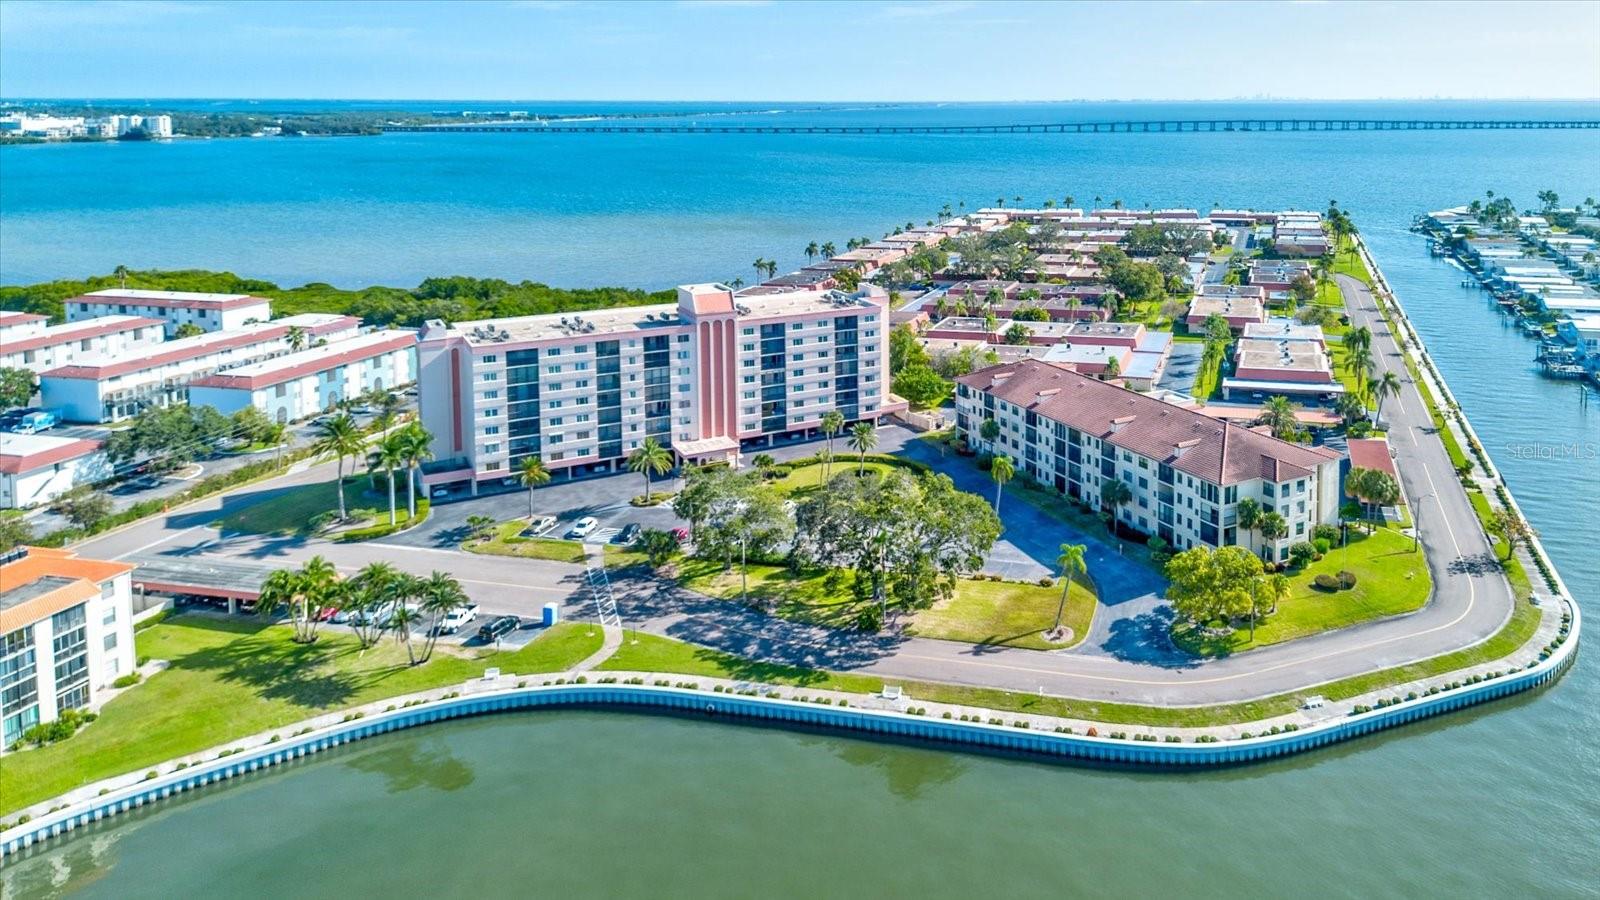 View CLEARWATER, FL 33764 condo